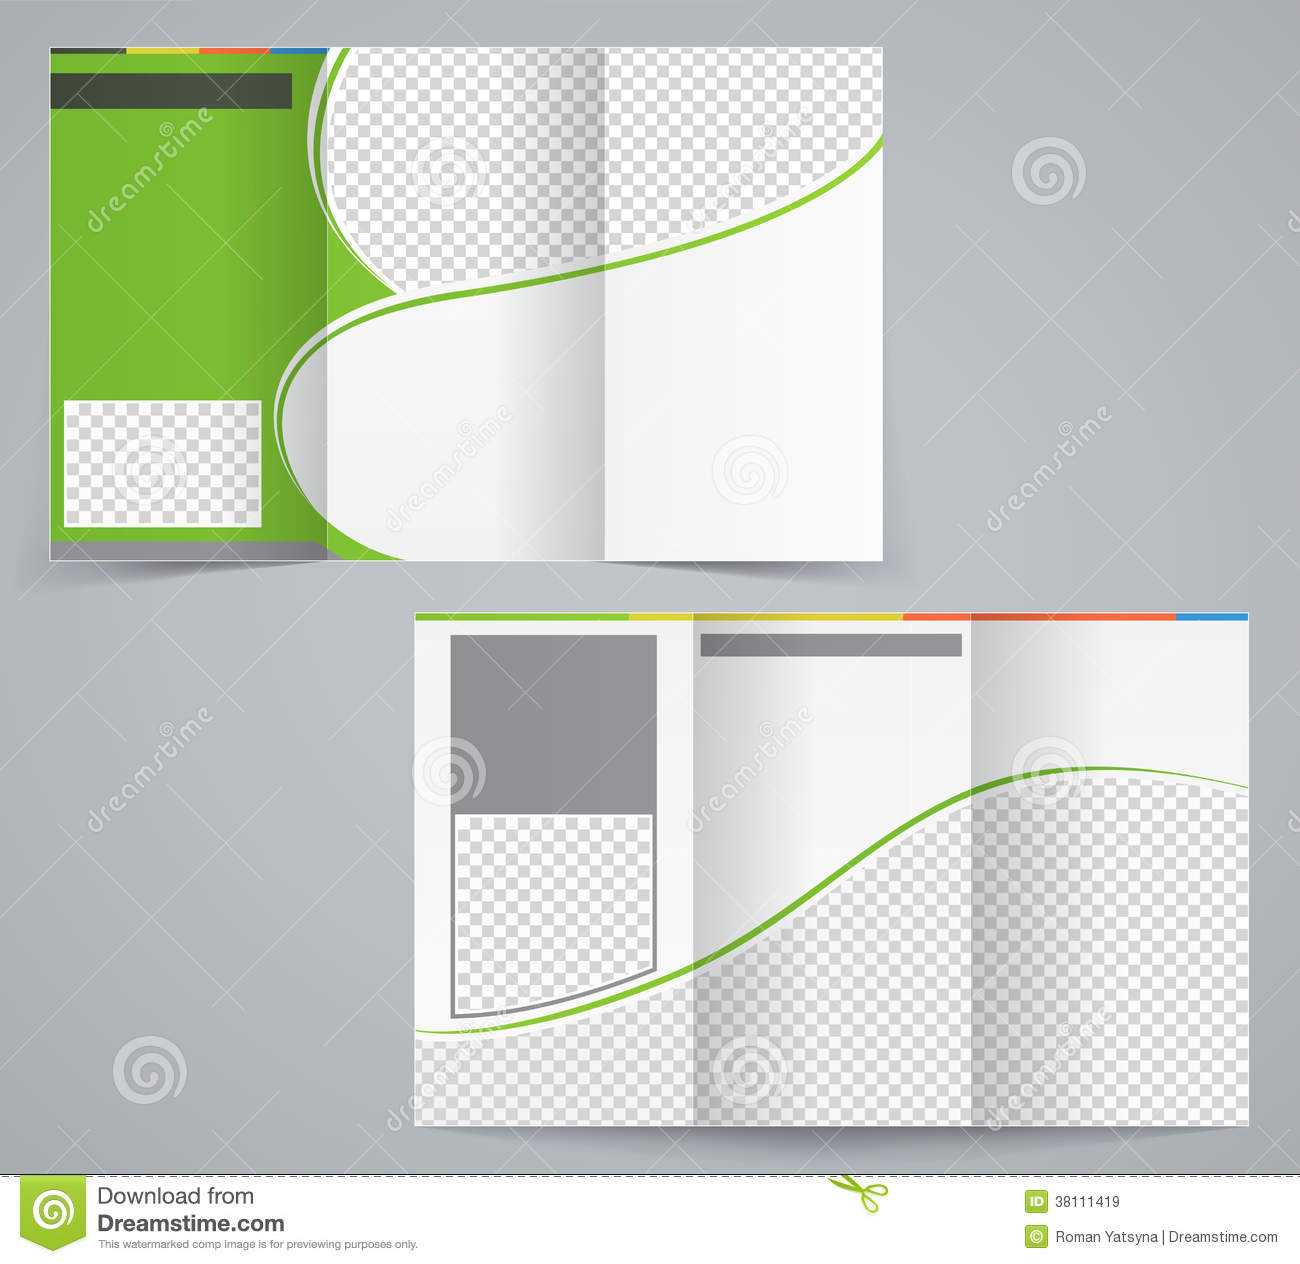 Tri Fold Business Brochure Template, Vector Green Stock Intended For Free Illustrator Brochure Templates Download